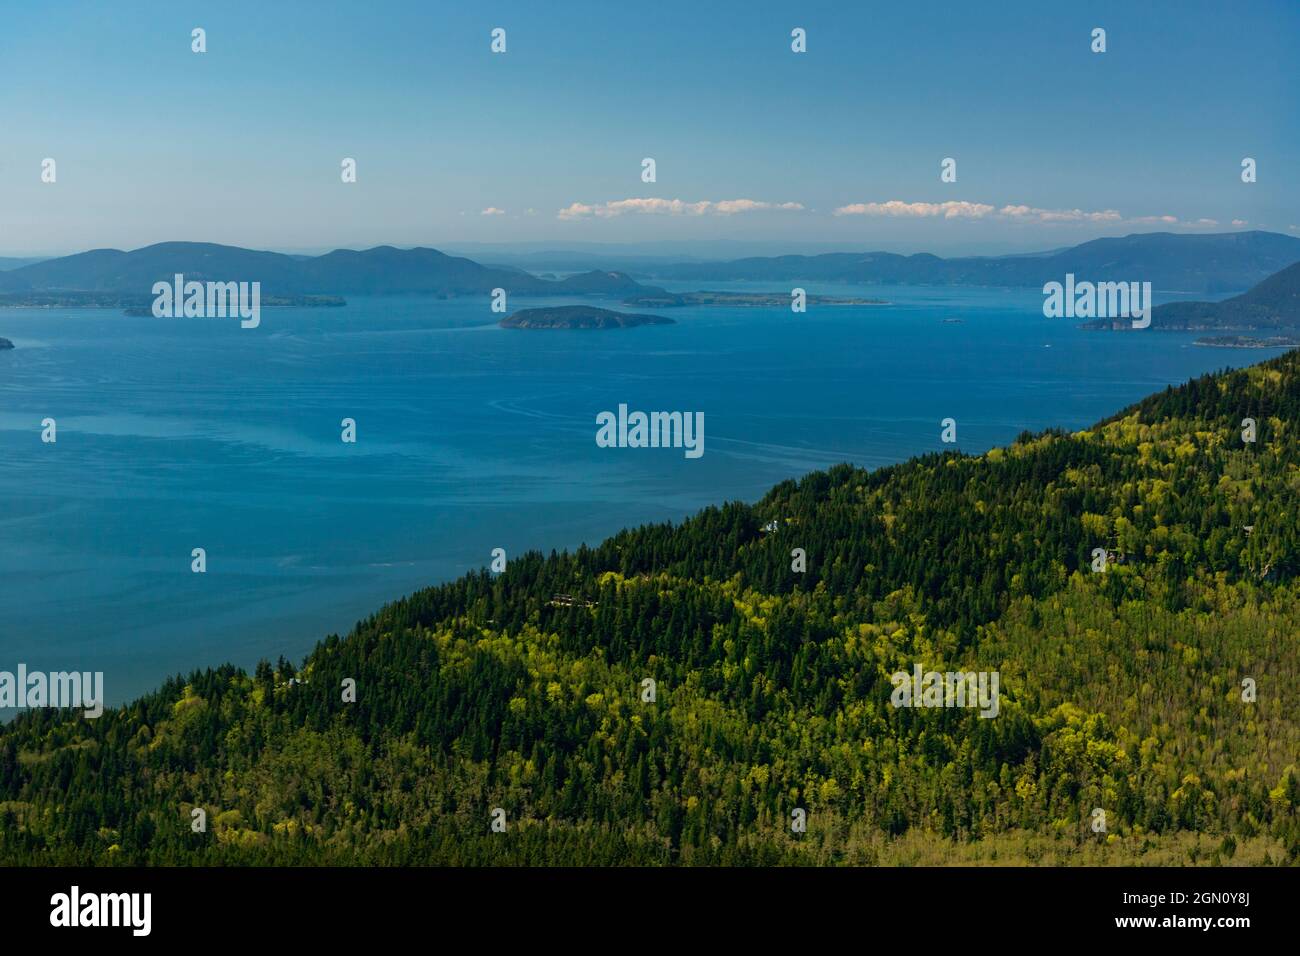 WA19643-00...WASHINGTON - View from Oyster Dome overlooking Samish Bay and Orcas Island. Stock Photo